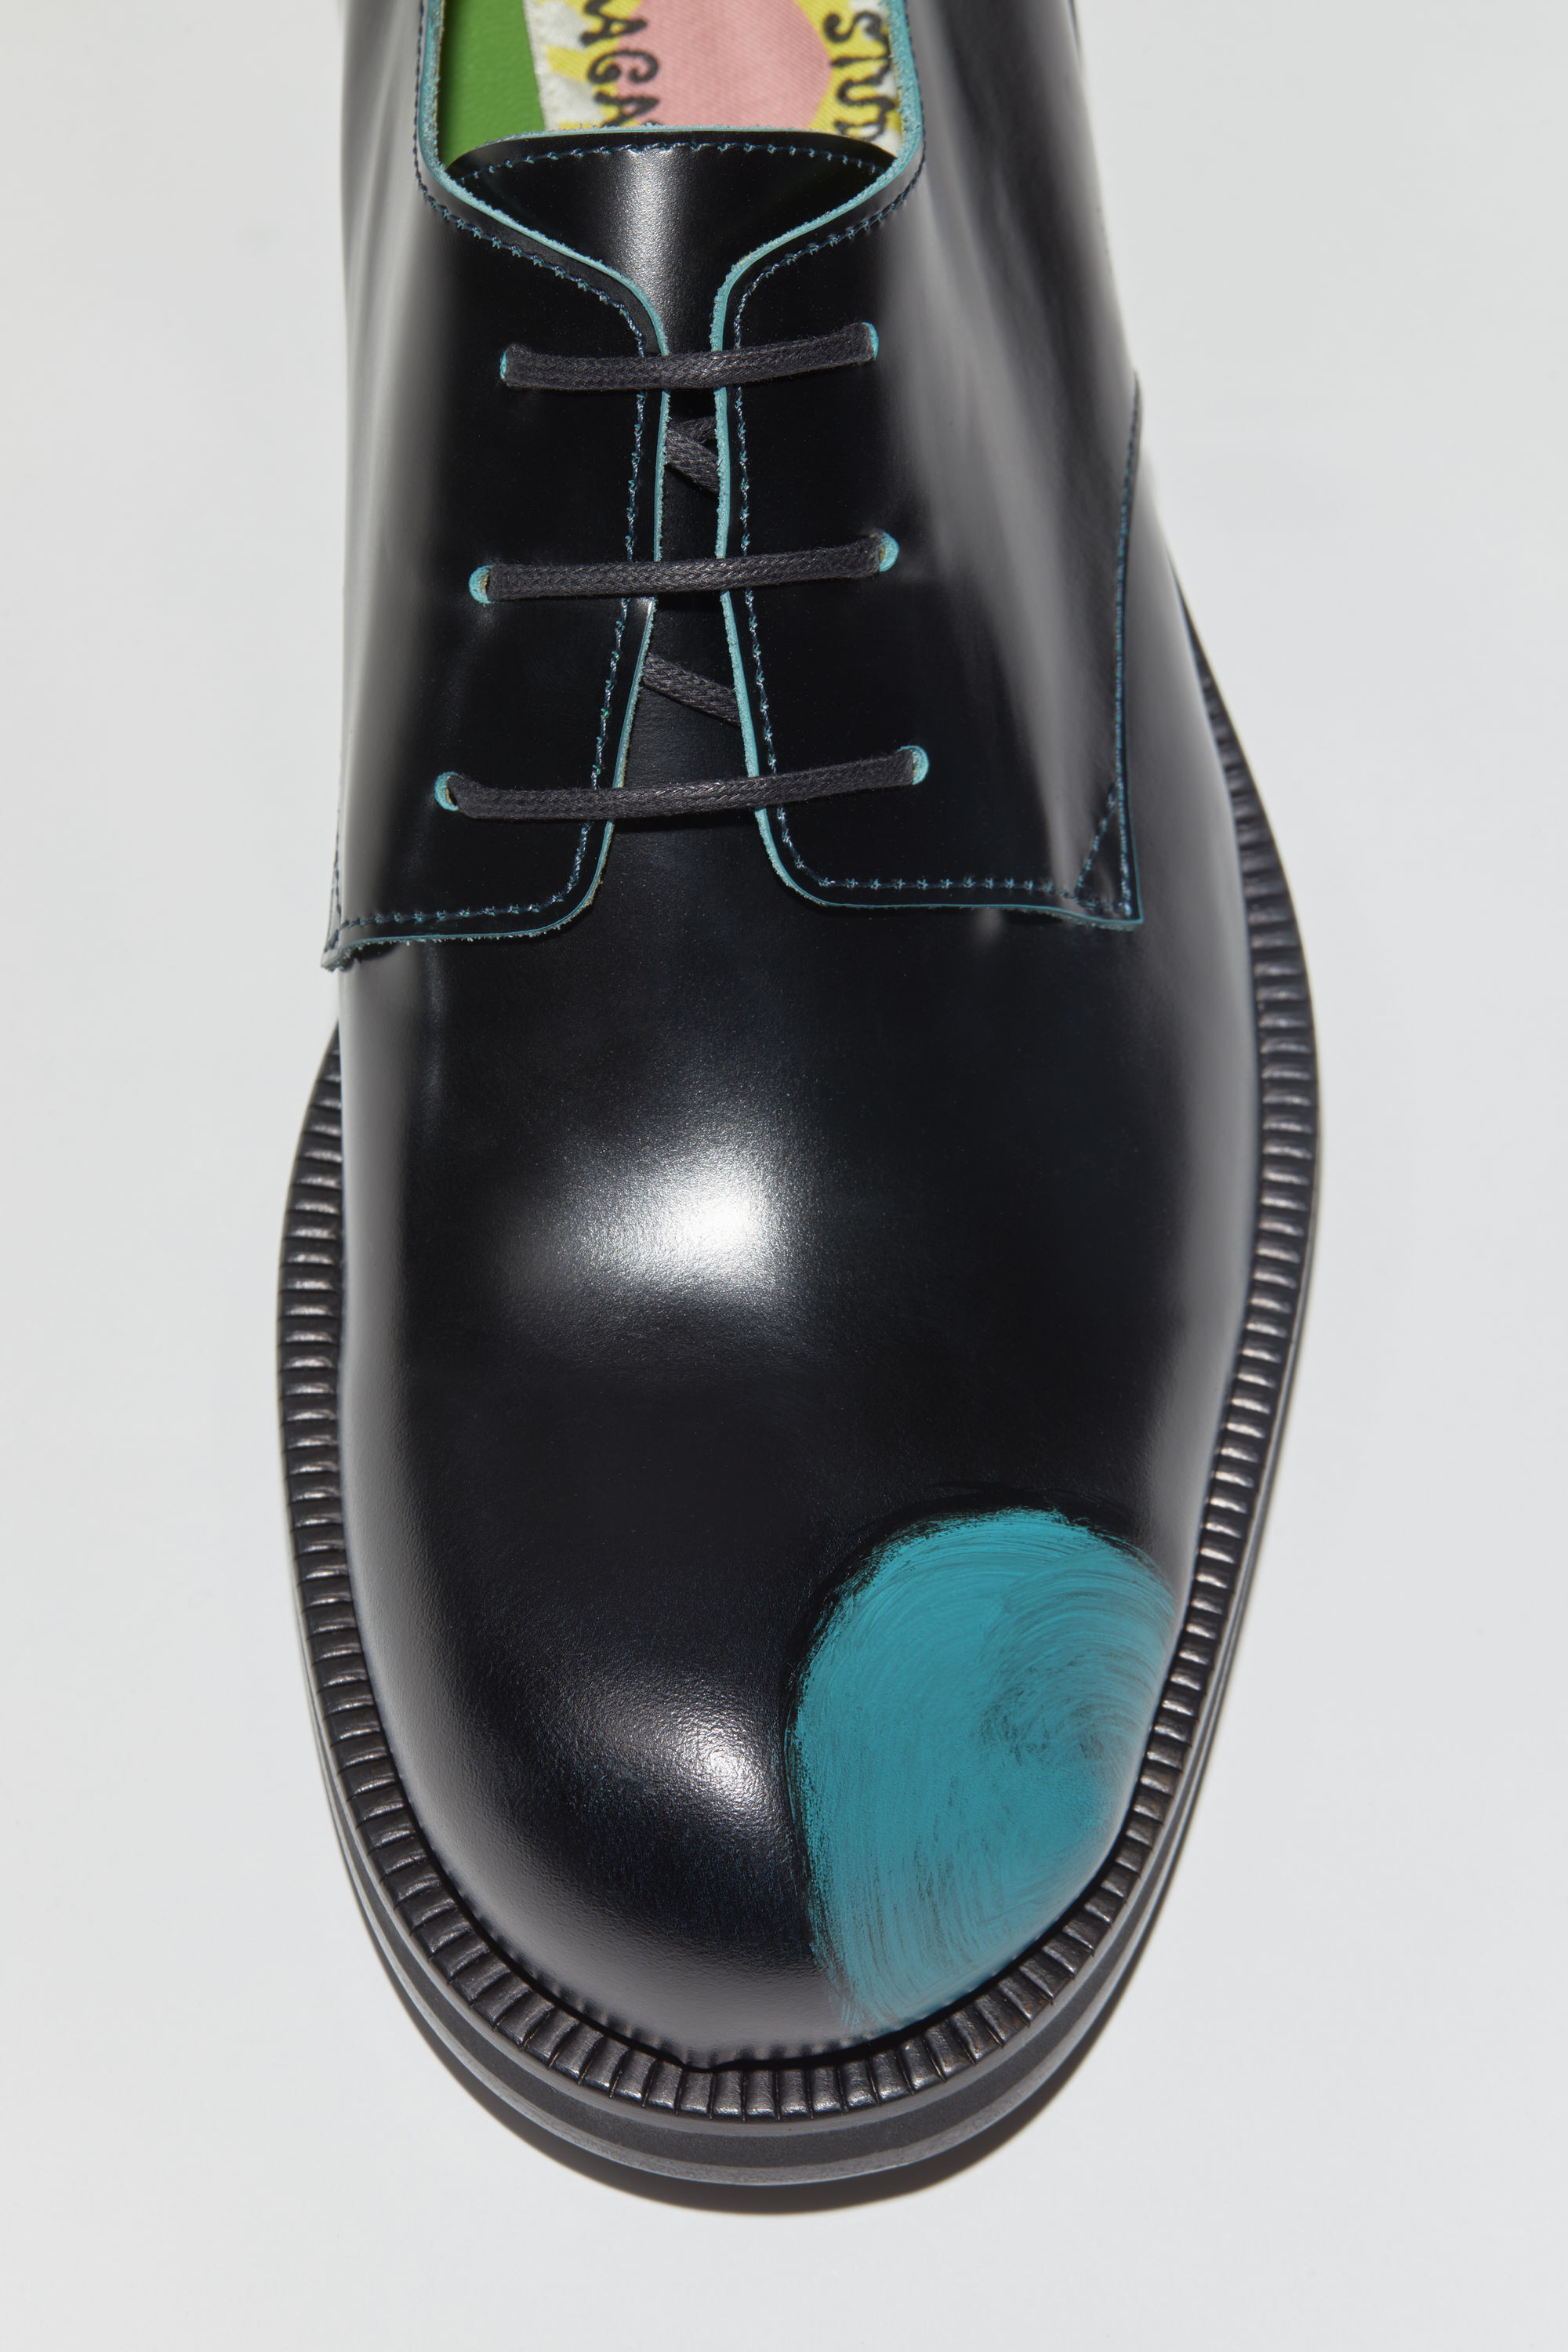 Acne Studios - Leather derby shoes - Turquoise blue/black